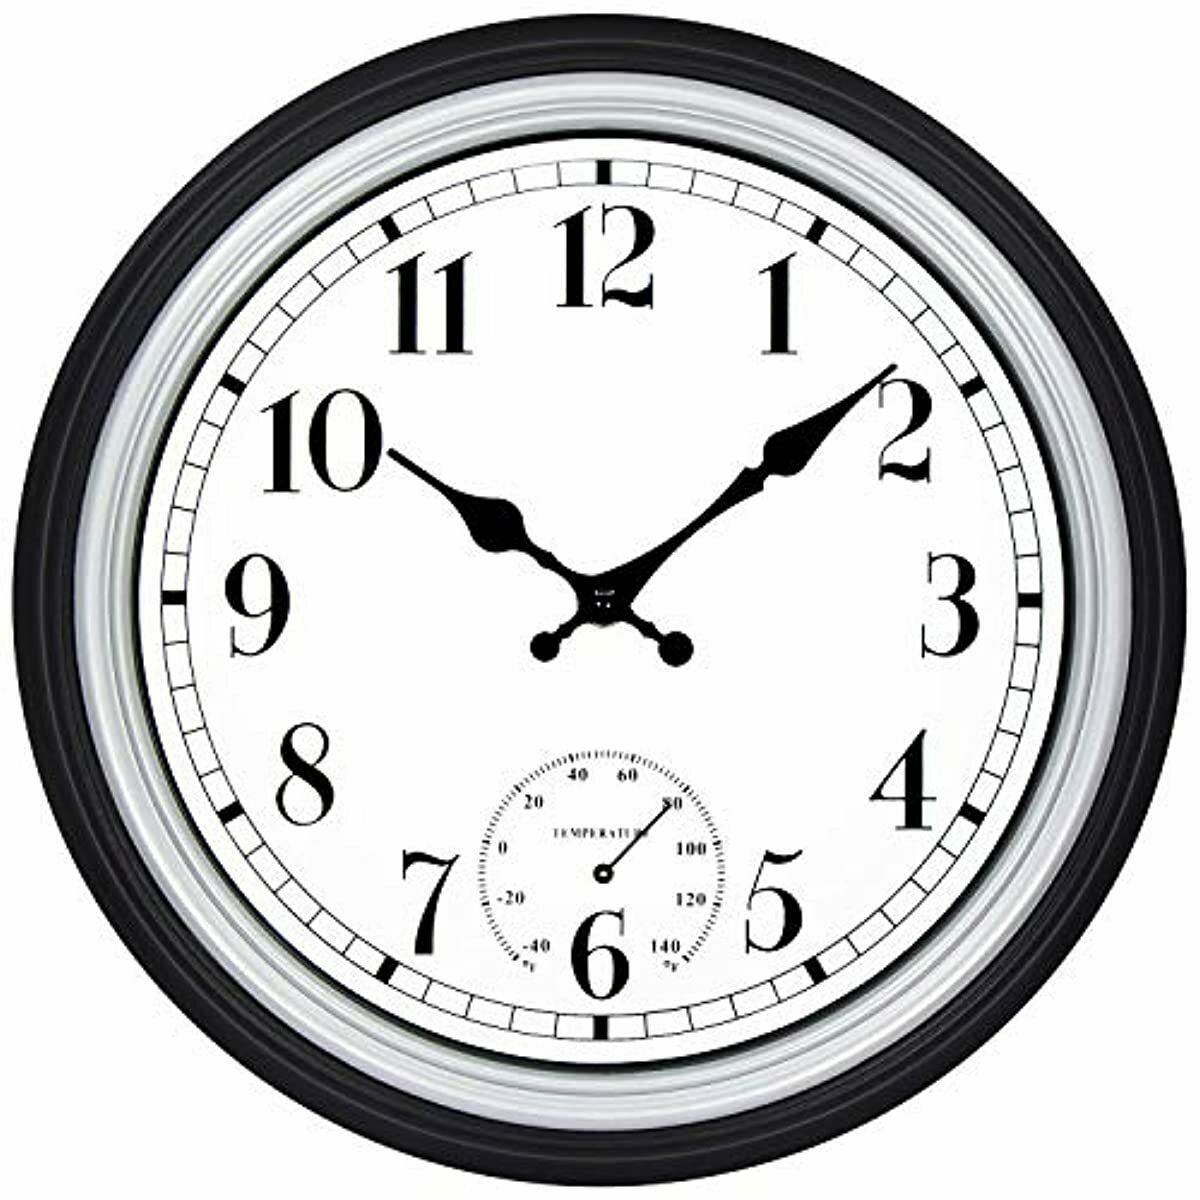 16” Large Outdoor Wall Clock Mute Hollow Battery Operated Waterproof Home Decor